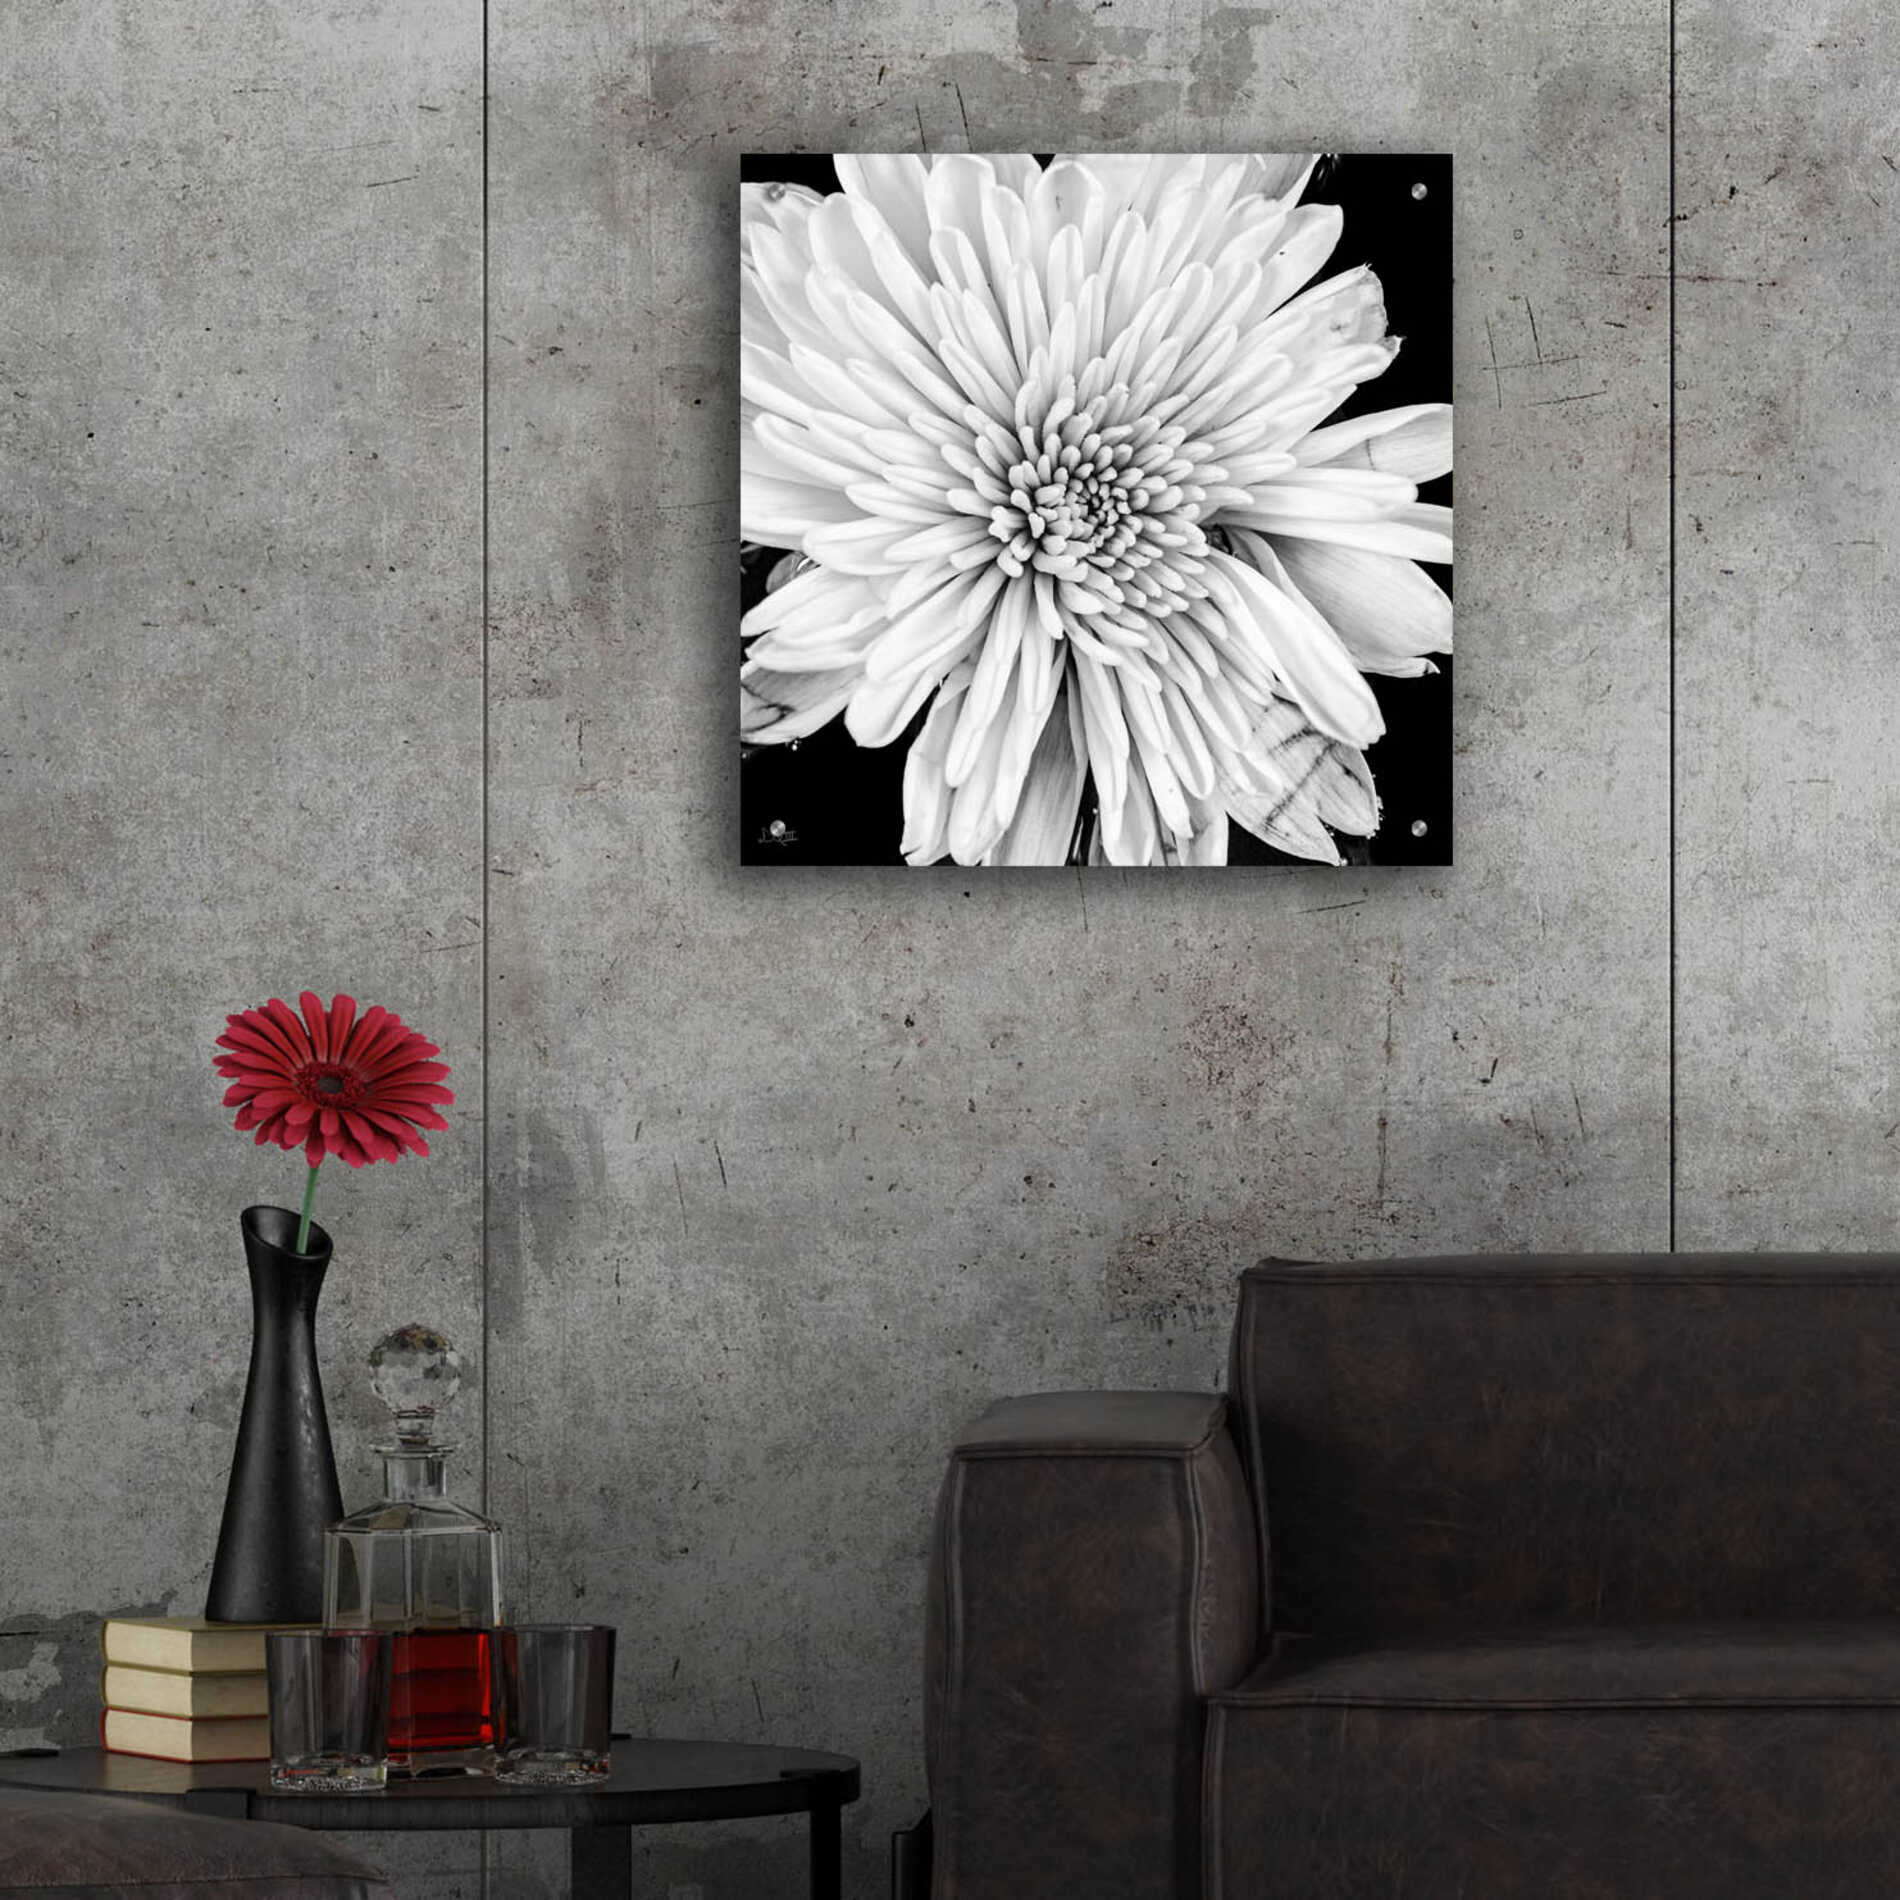 Epic Art 'Black and White Love II' by Donnie Quillen, Acrylic Glass Wall Art,24x24